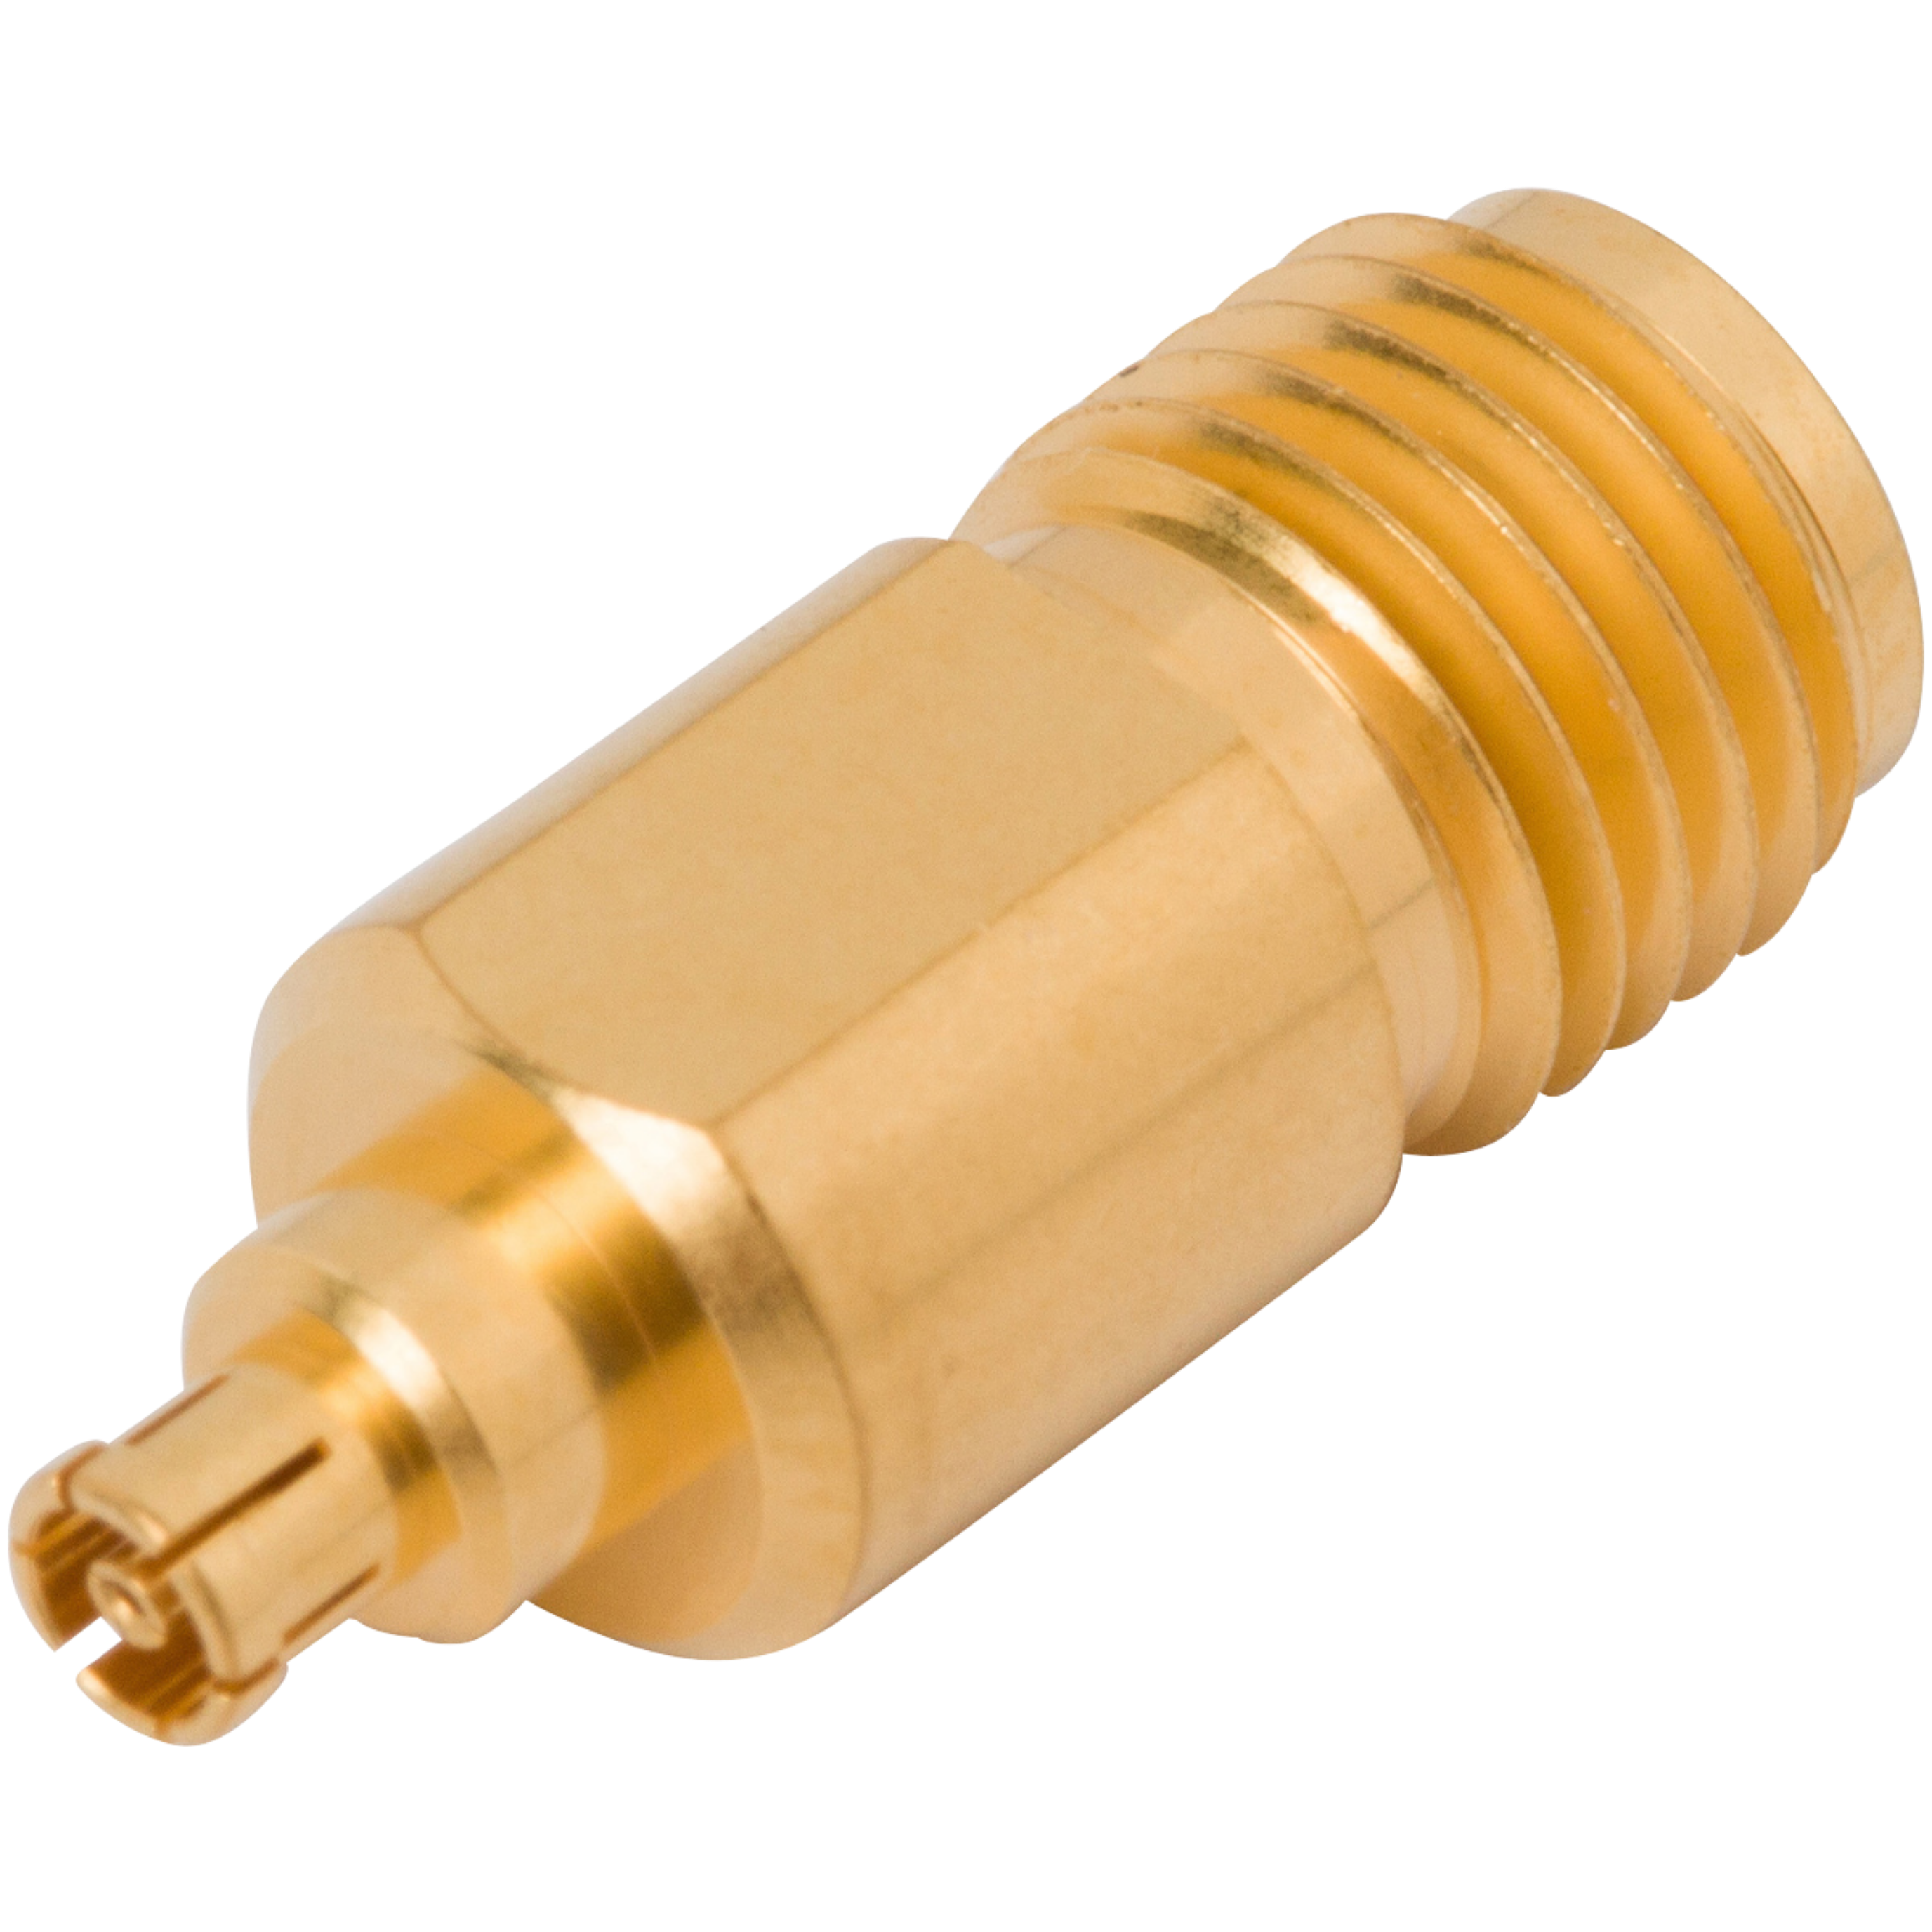 2.92mm Female to SMPM Female Adapter, 1115-6088